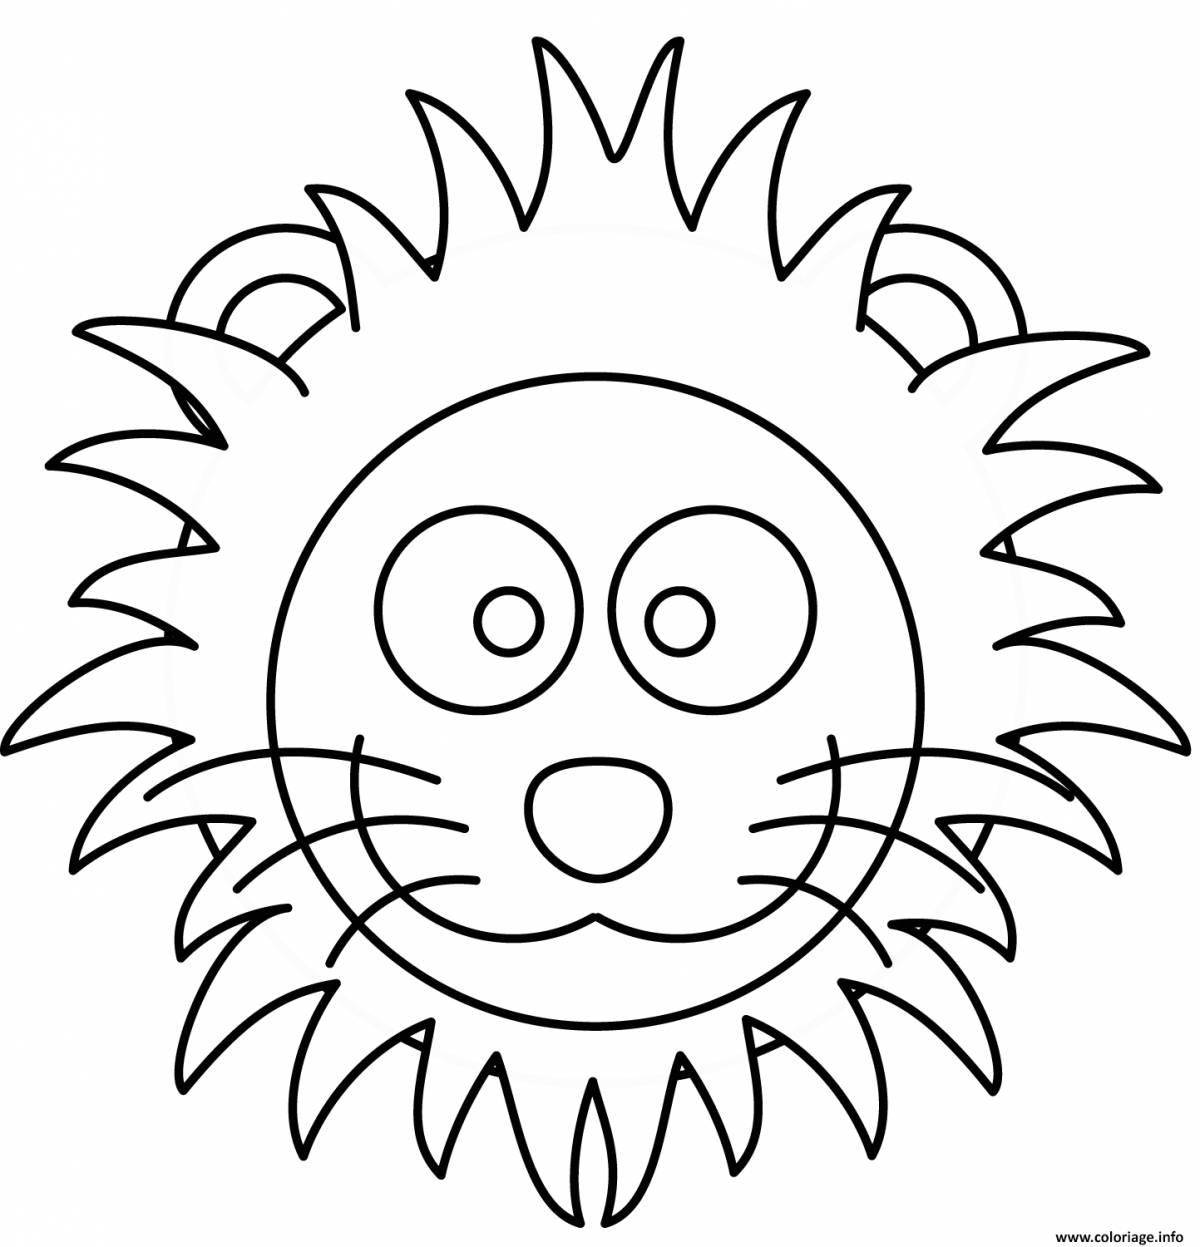 Luxury lion head coloring book